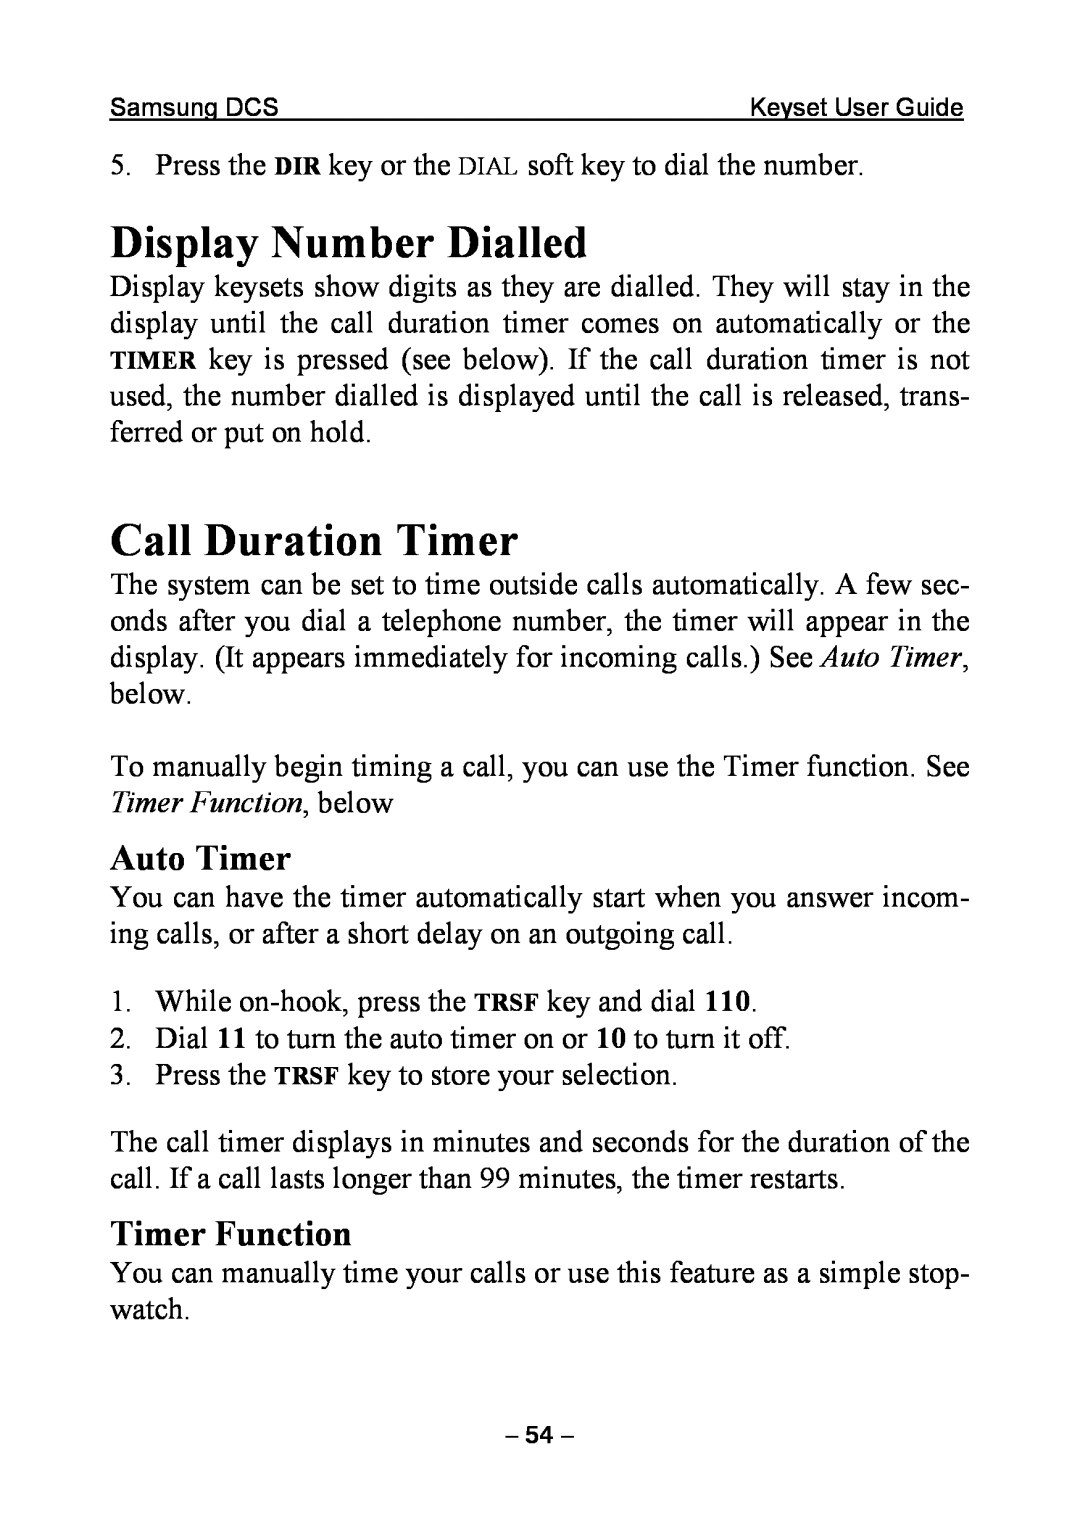 Samsung DCS KEYSET manual Display Number Dialled, Call Duration Timer, Auto Timer, Timer Function 